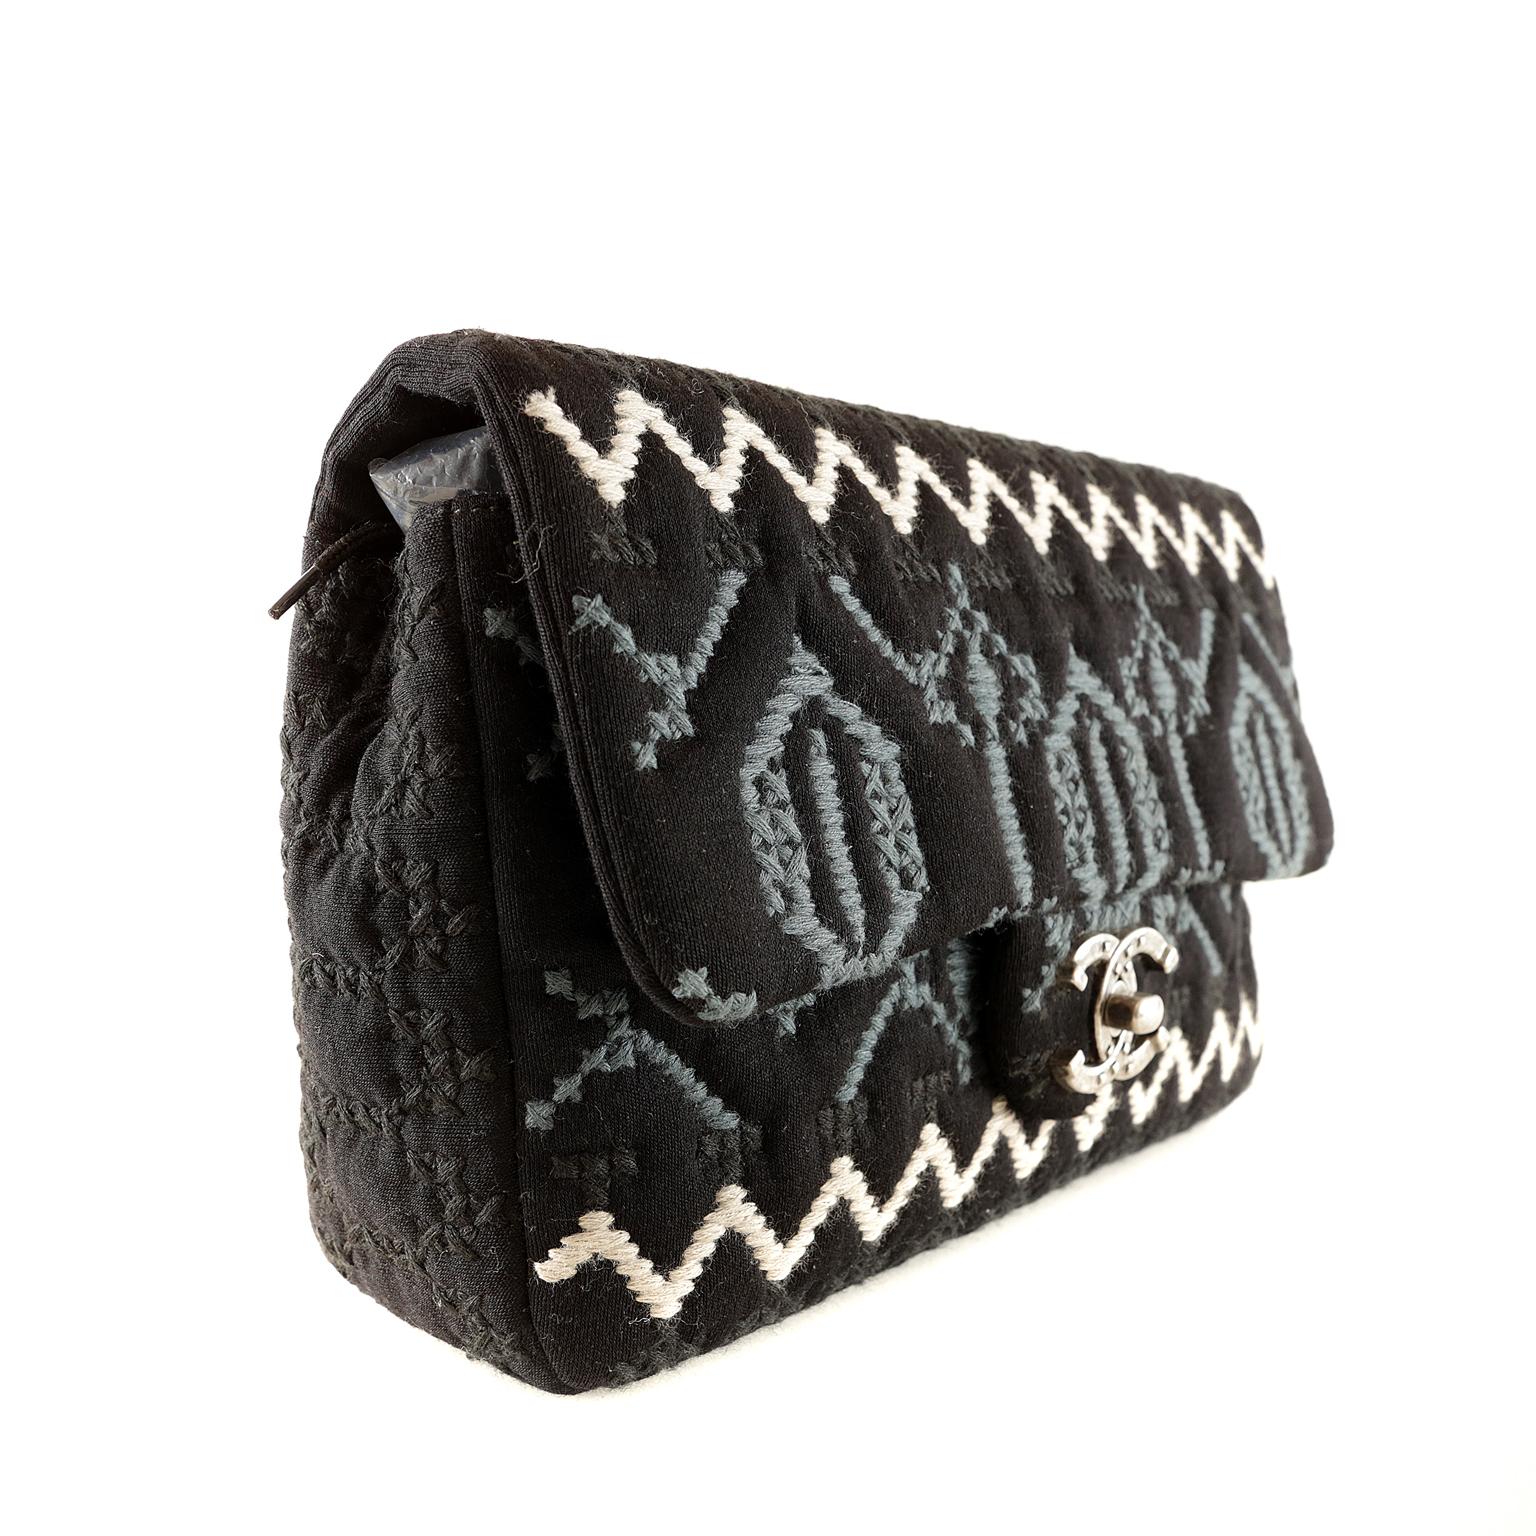 Chanel Black Jersey Embroidered Flap Bag- Pristine Condition; appears never carried
From the Paris- Dallas Métiers D’art Pre-Fall 2014 collection, it has a southwestern theme with embroidered top stitching and aged metal hardware. 
Large single flap